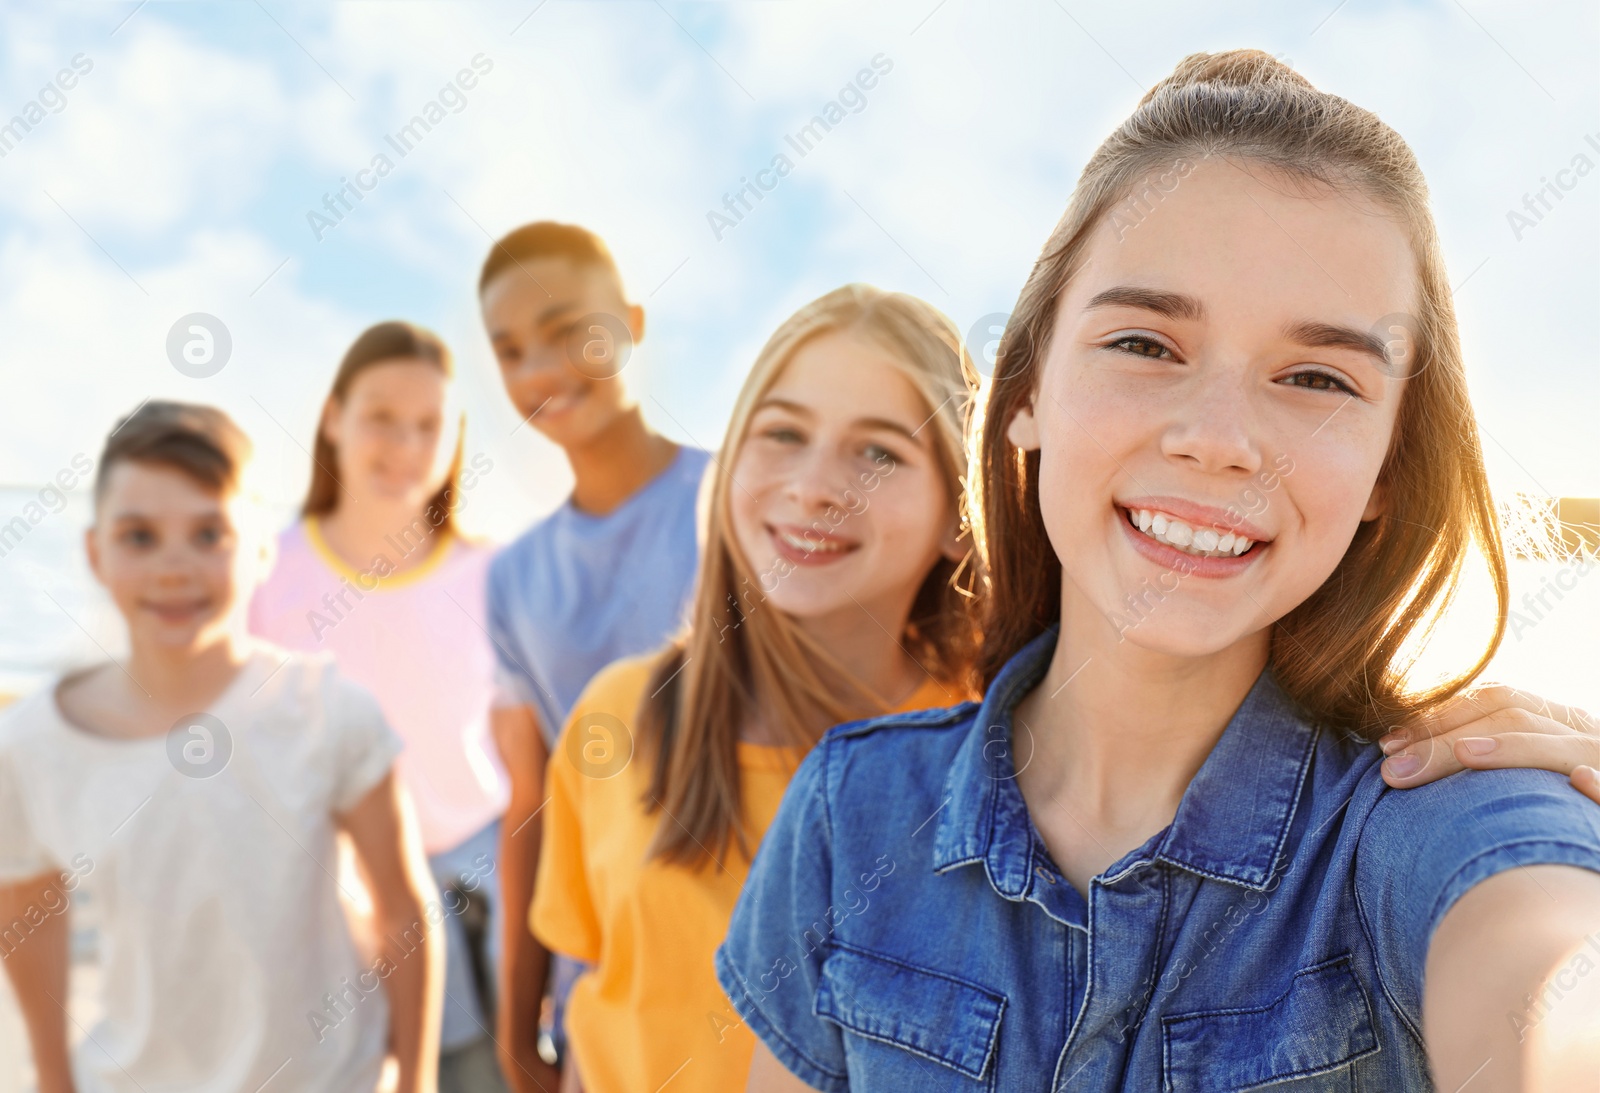 Image of School holidays. Group of happy children taking selfie outdoors